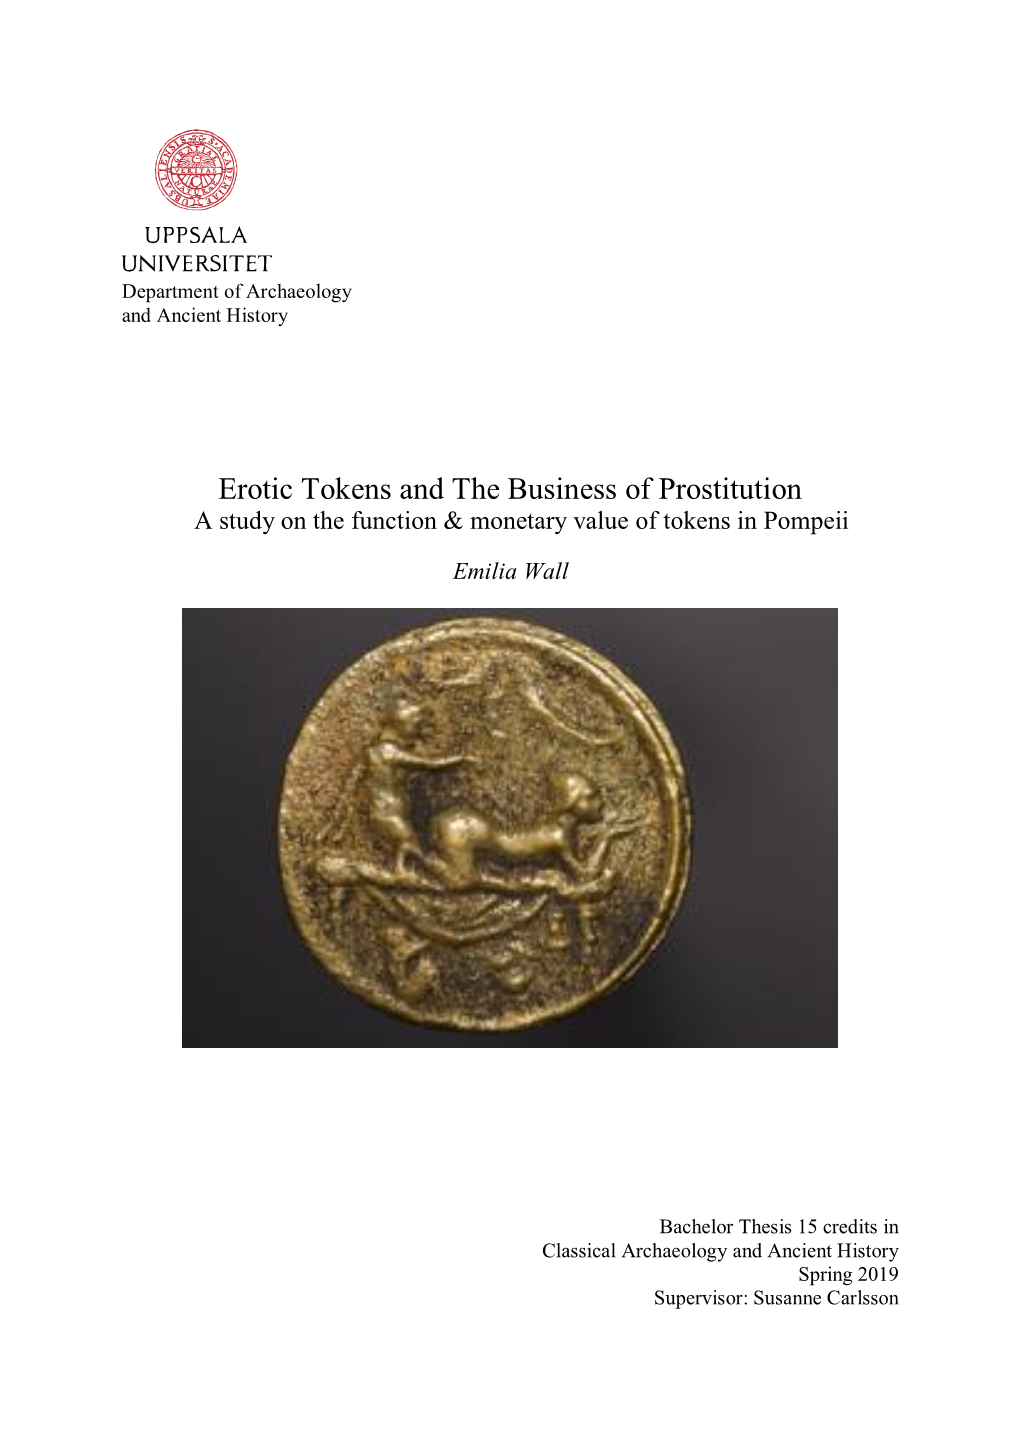 Erotic Tokens and the Business of Prostitution a Study on the Function & Monetary Value of Tokens in Pompeii